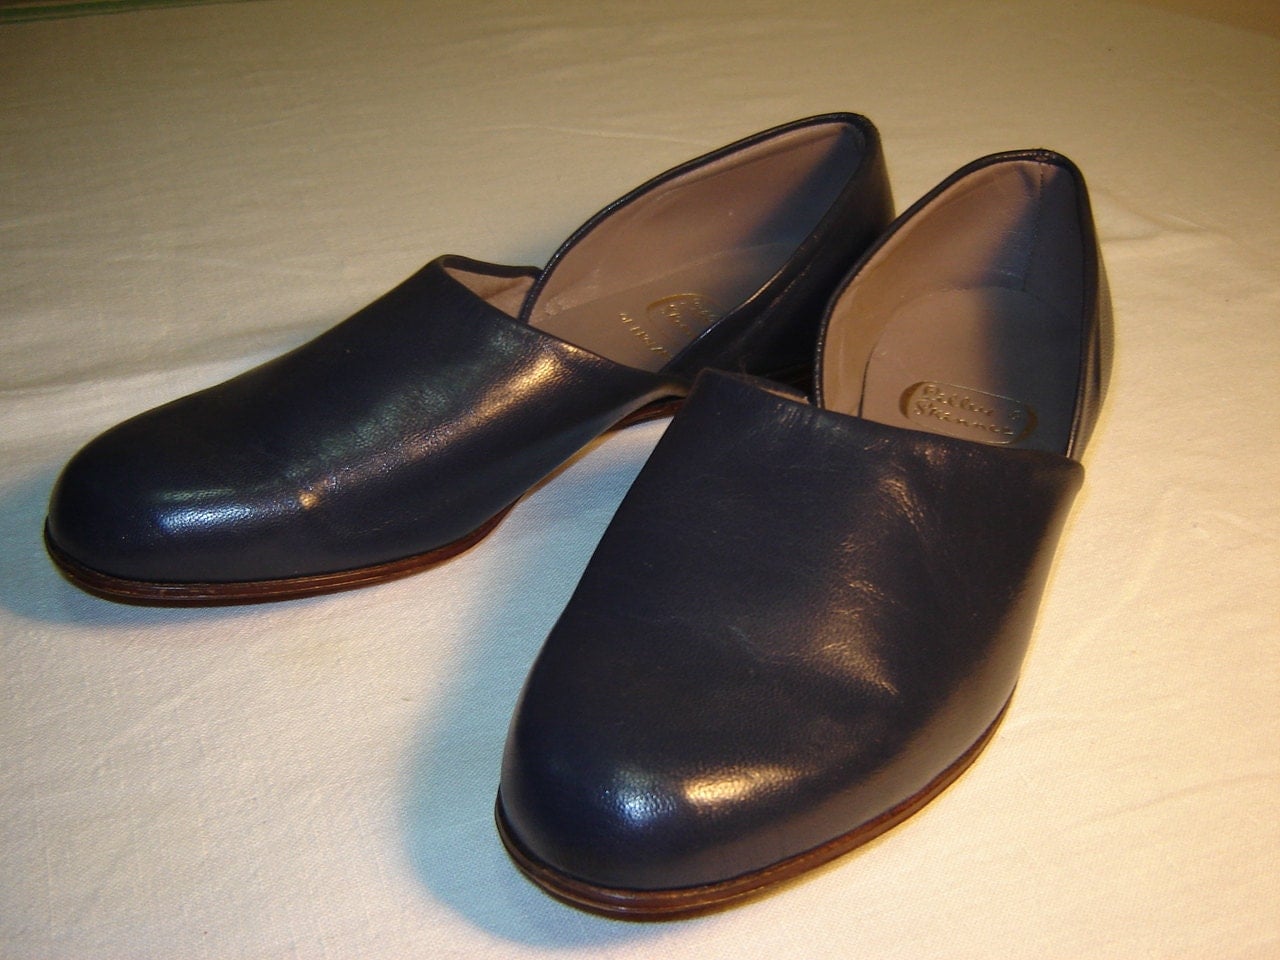 SALE Old-Fashioned Leather Slippers/Shoes by Lilly and Skinner